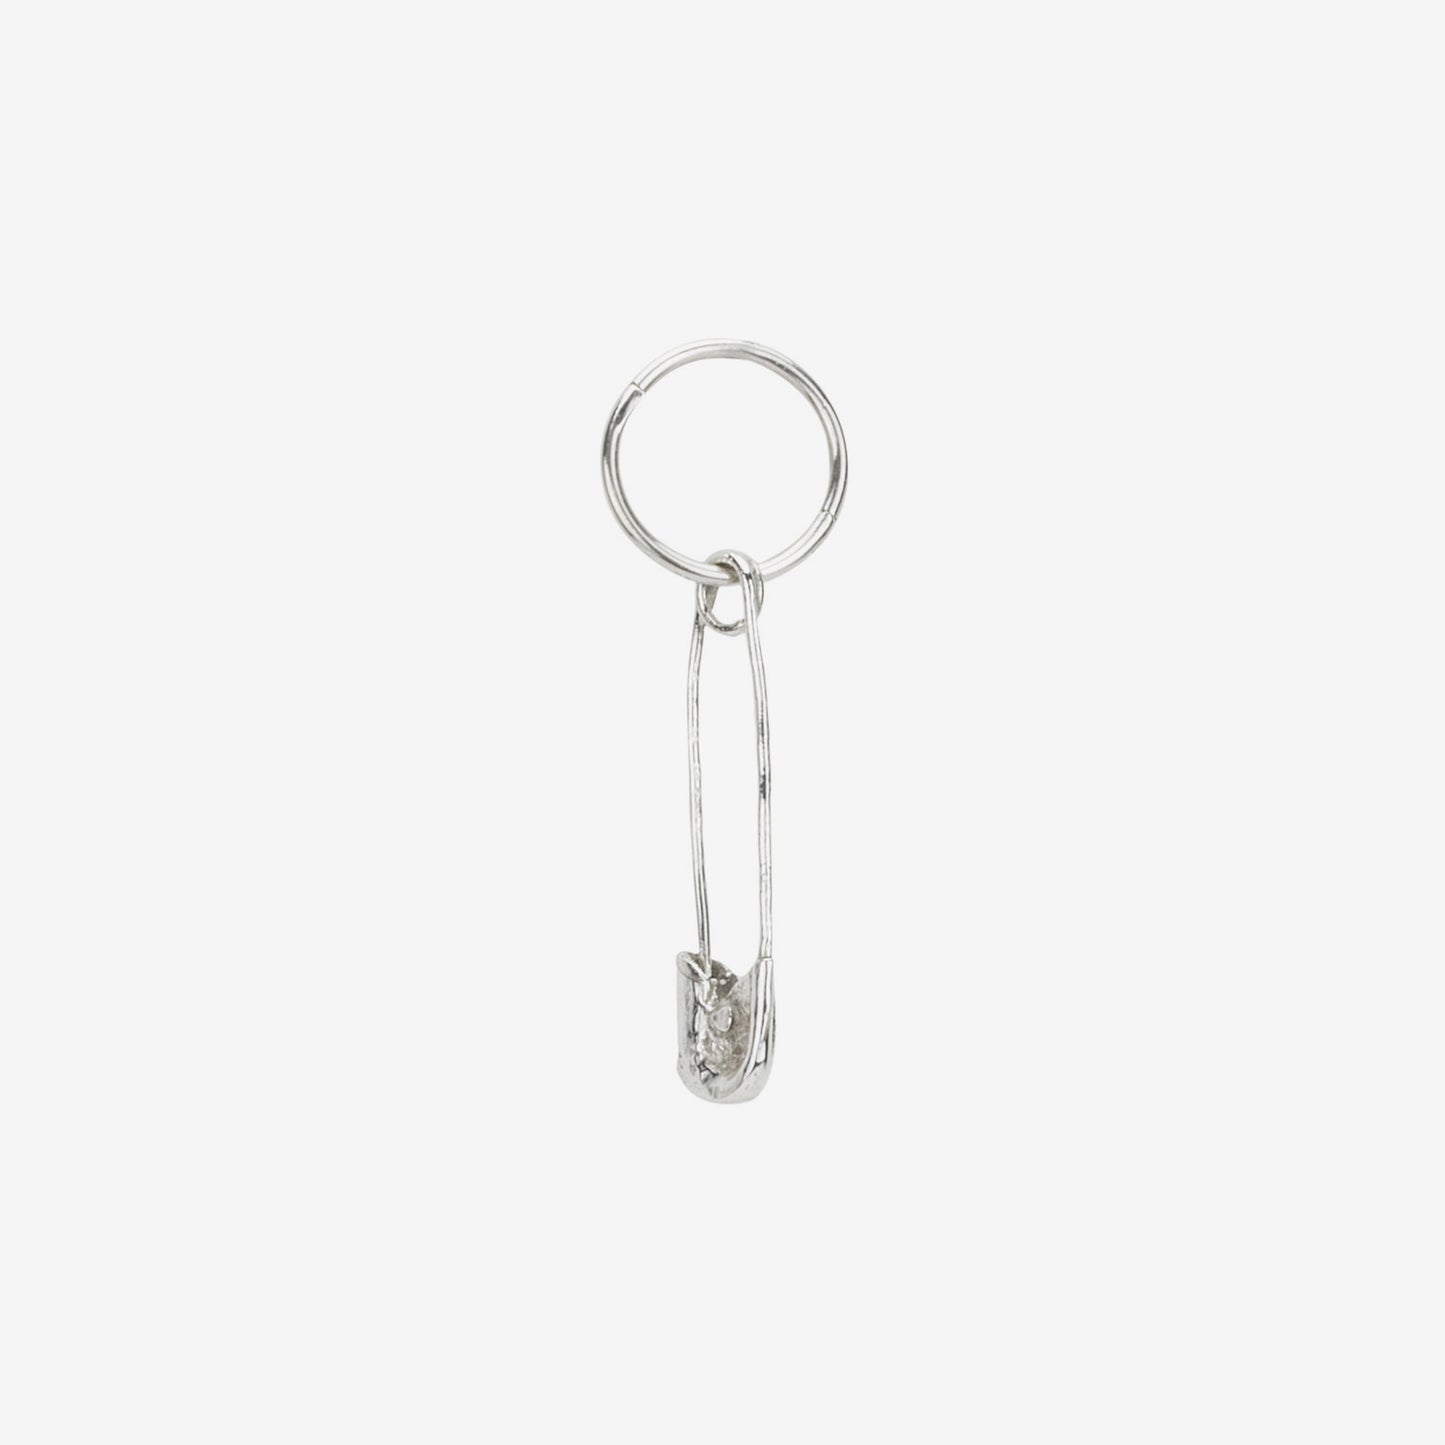 Safetypin Earring - Silver